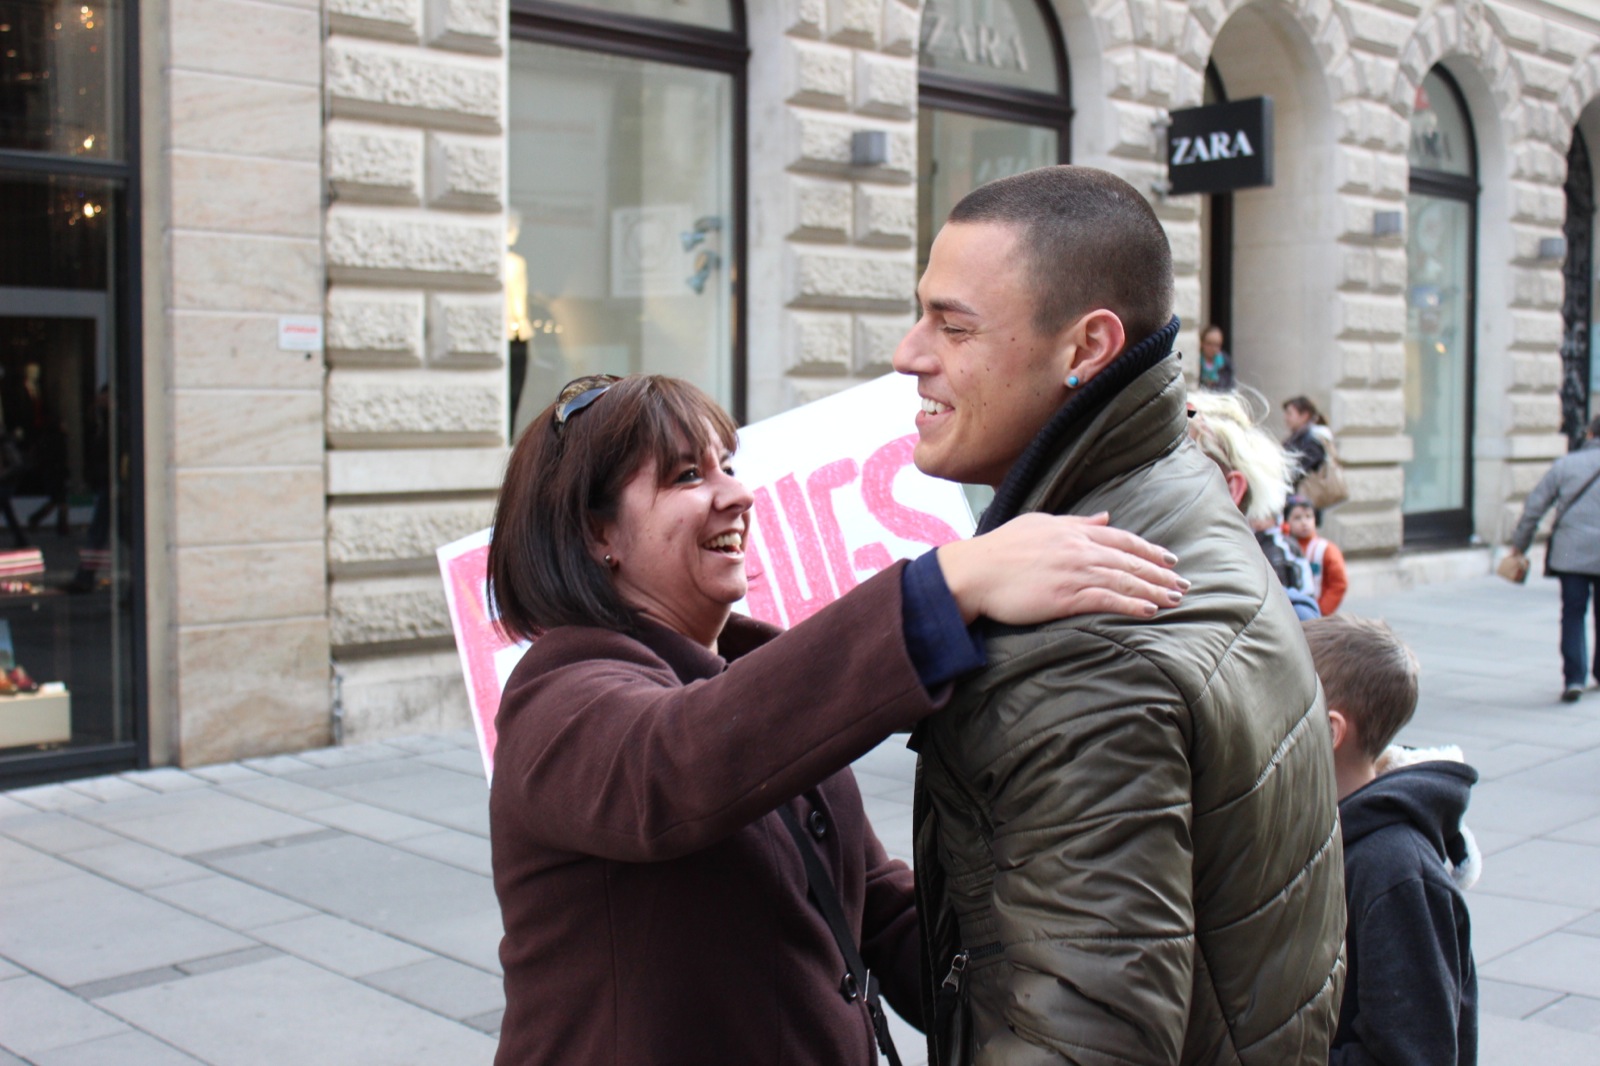 Free Hugs Vienna February 15th, 2014 - Picture by Alexander Holly